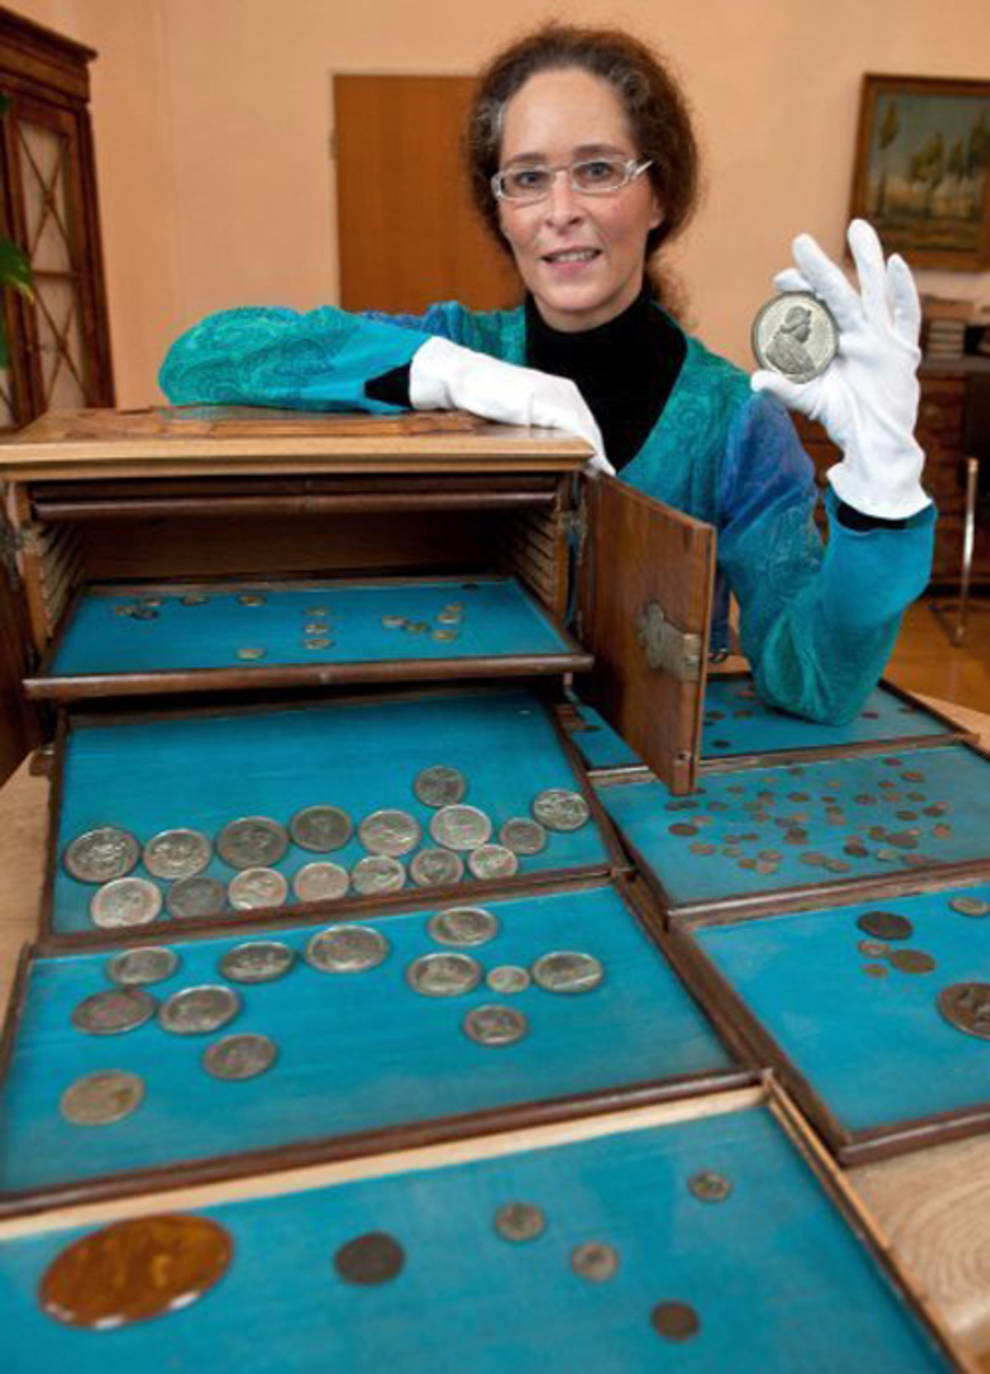 A collection of antique coins found by a cleaner from the Bavarian Library